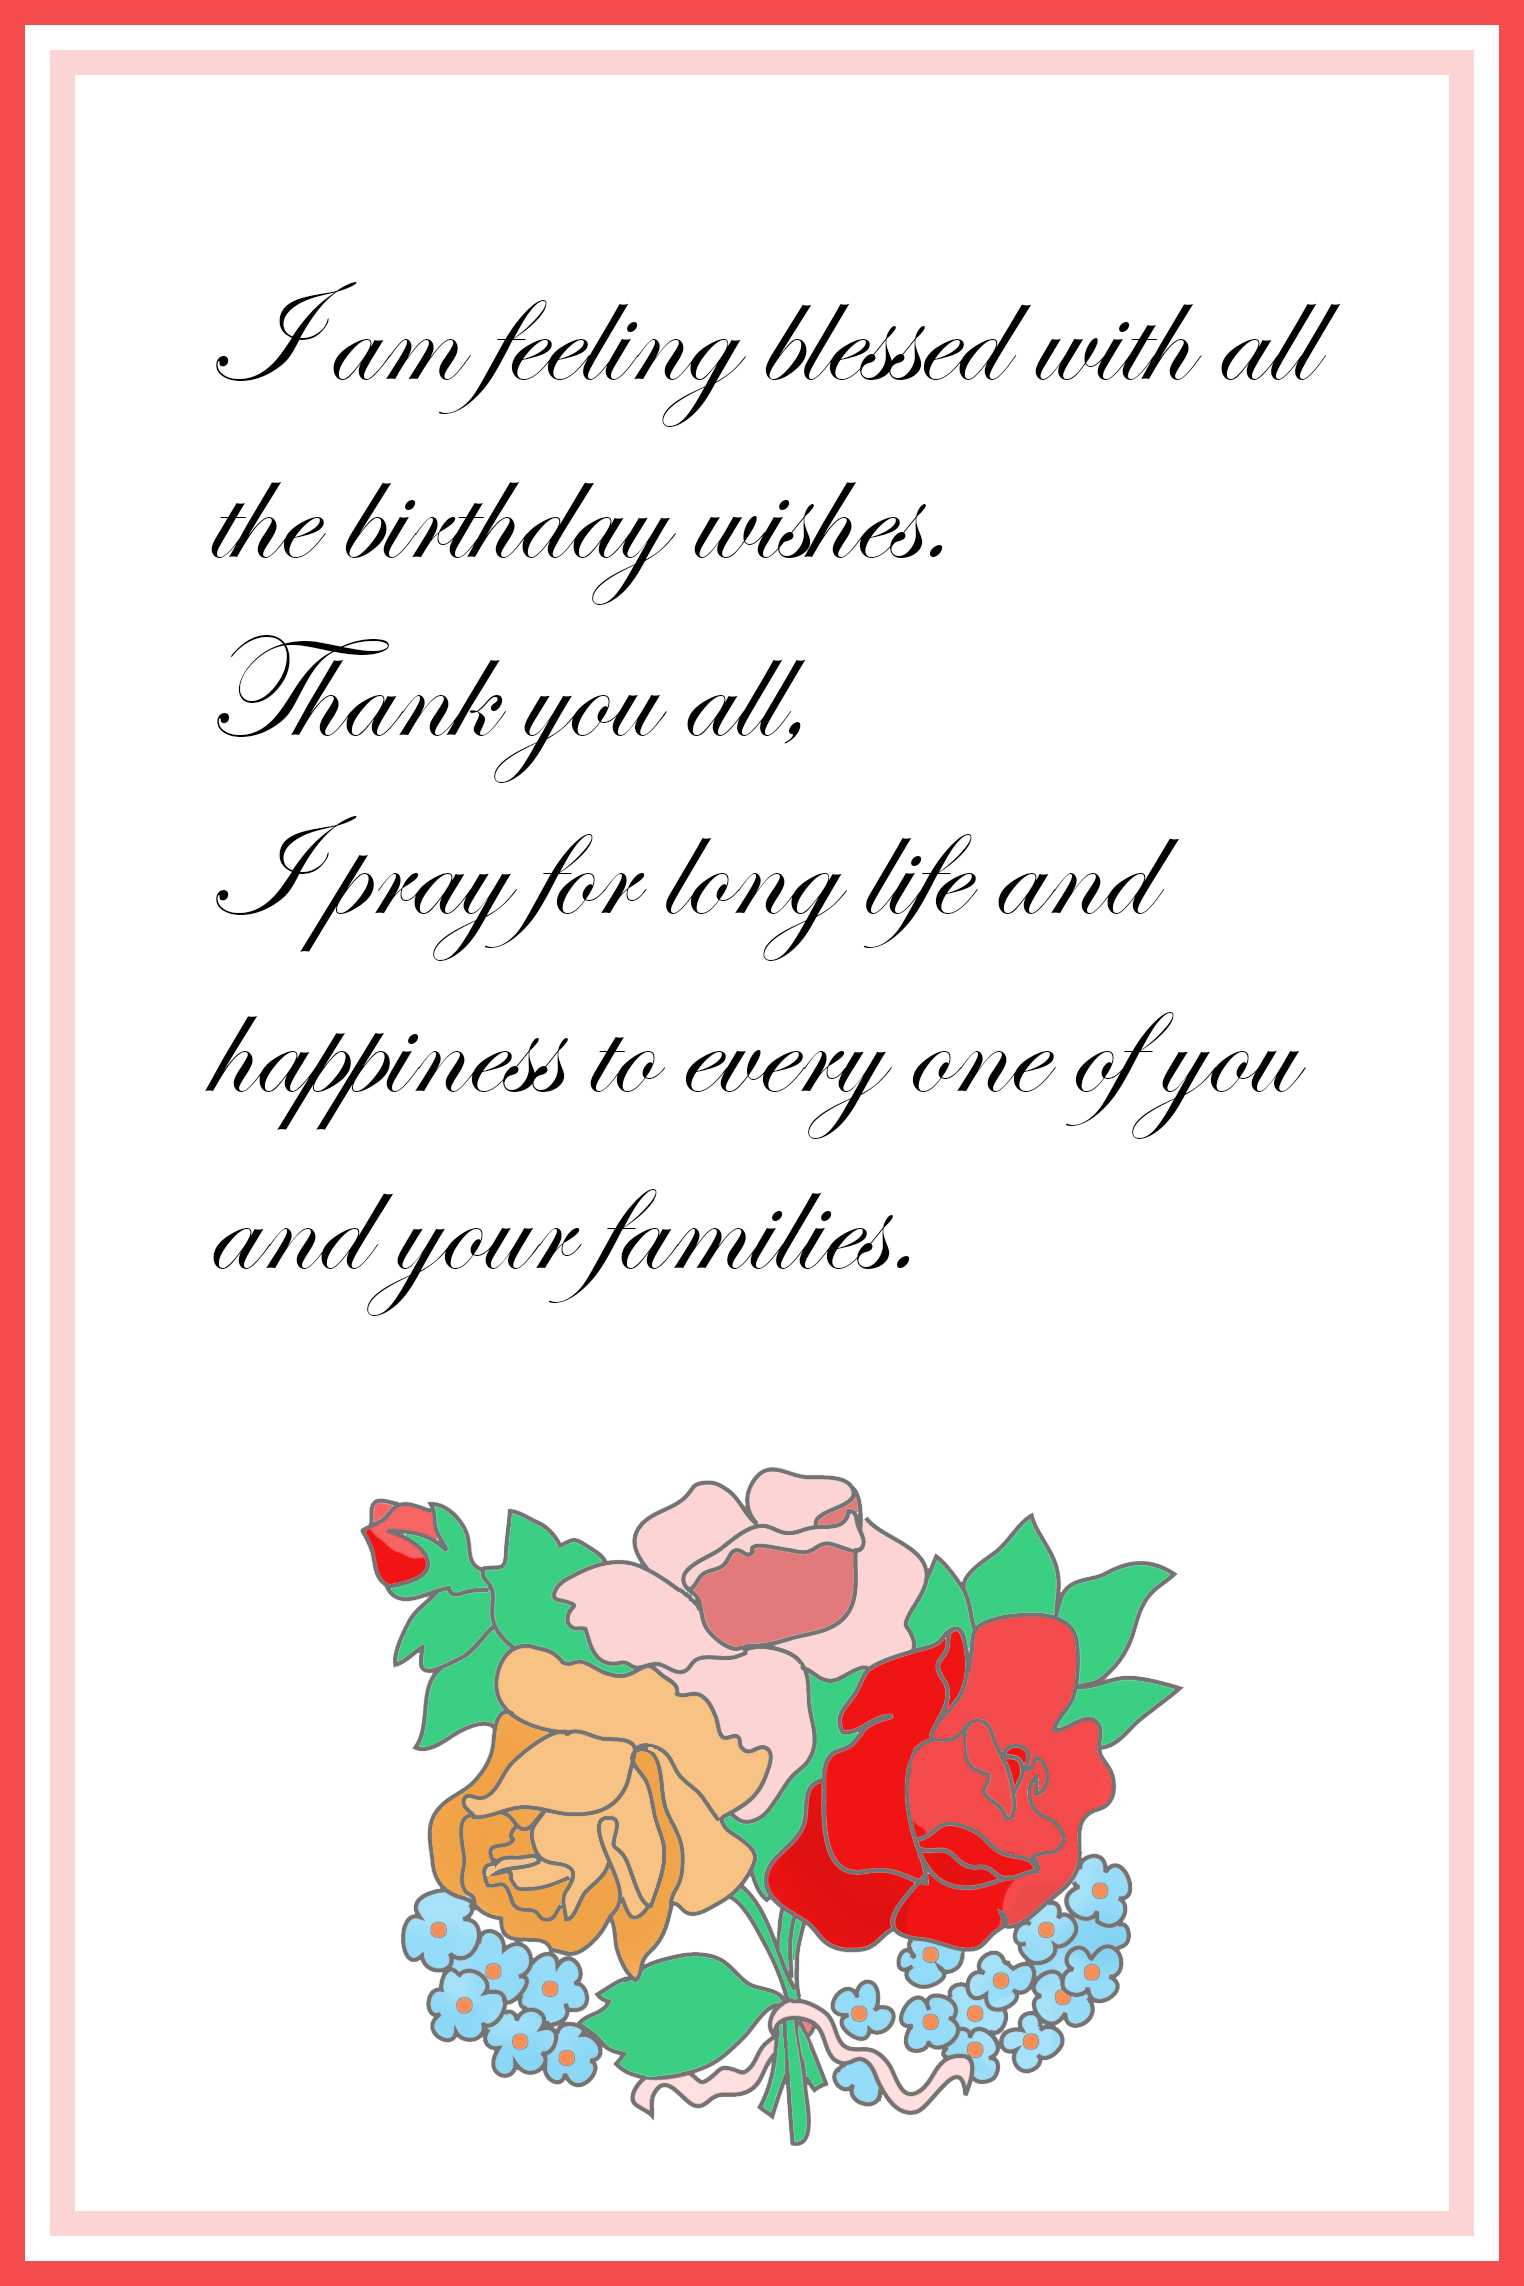 Printable Thank You Cards – Free Printable Greeting Cards Intended For Christmas Thank You Card Templates Free